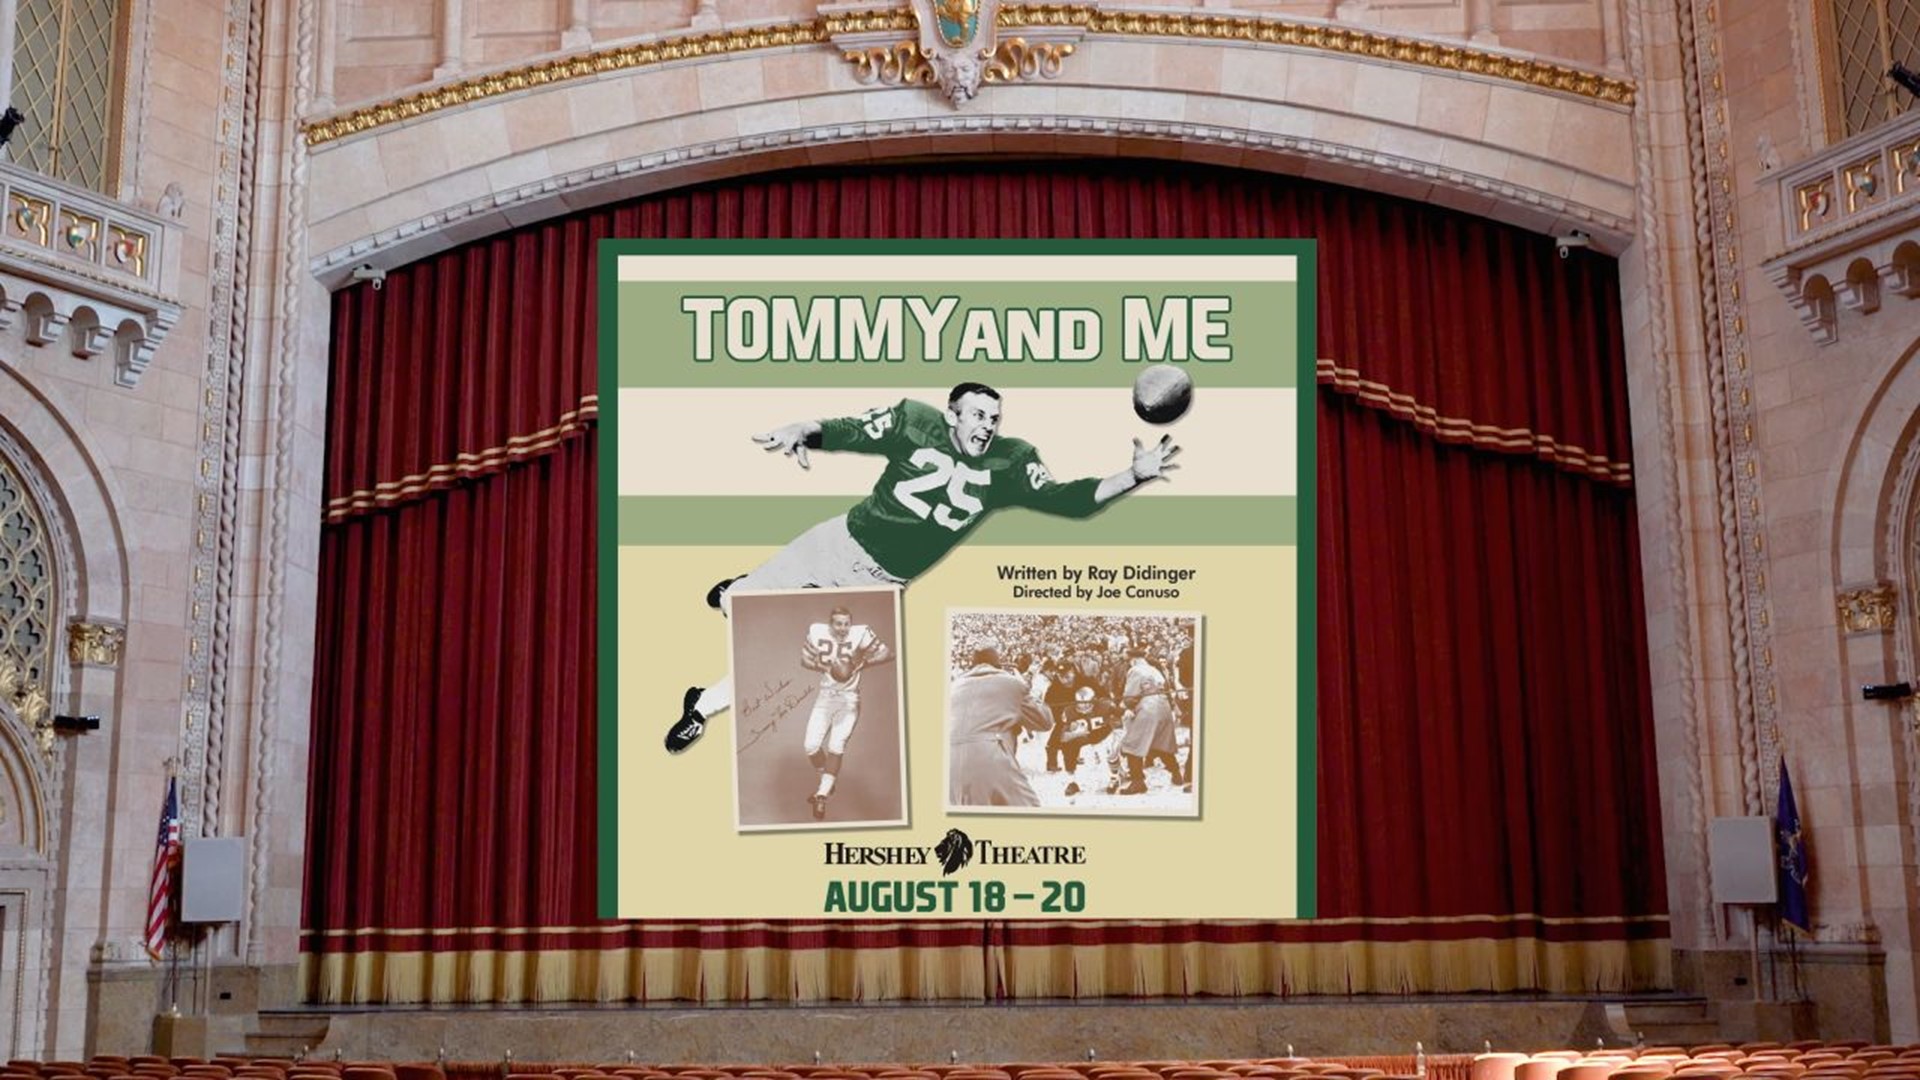 Hall of Fame sportswriter Ray Didinger brings his play 'Tommy and Me' to Hershey this week.  It tells the tale of his evolving friendship with Tommy McDonald.